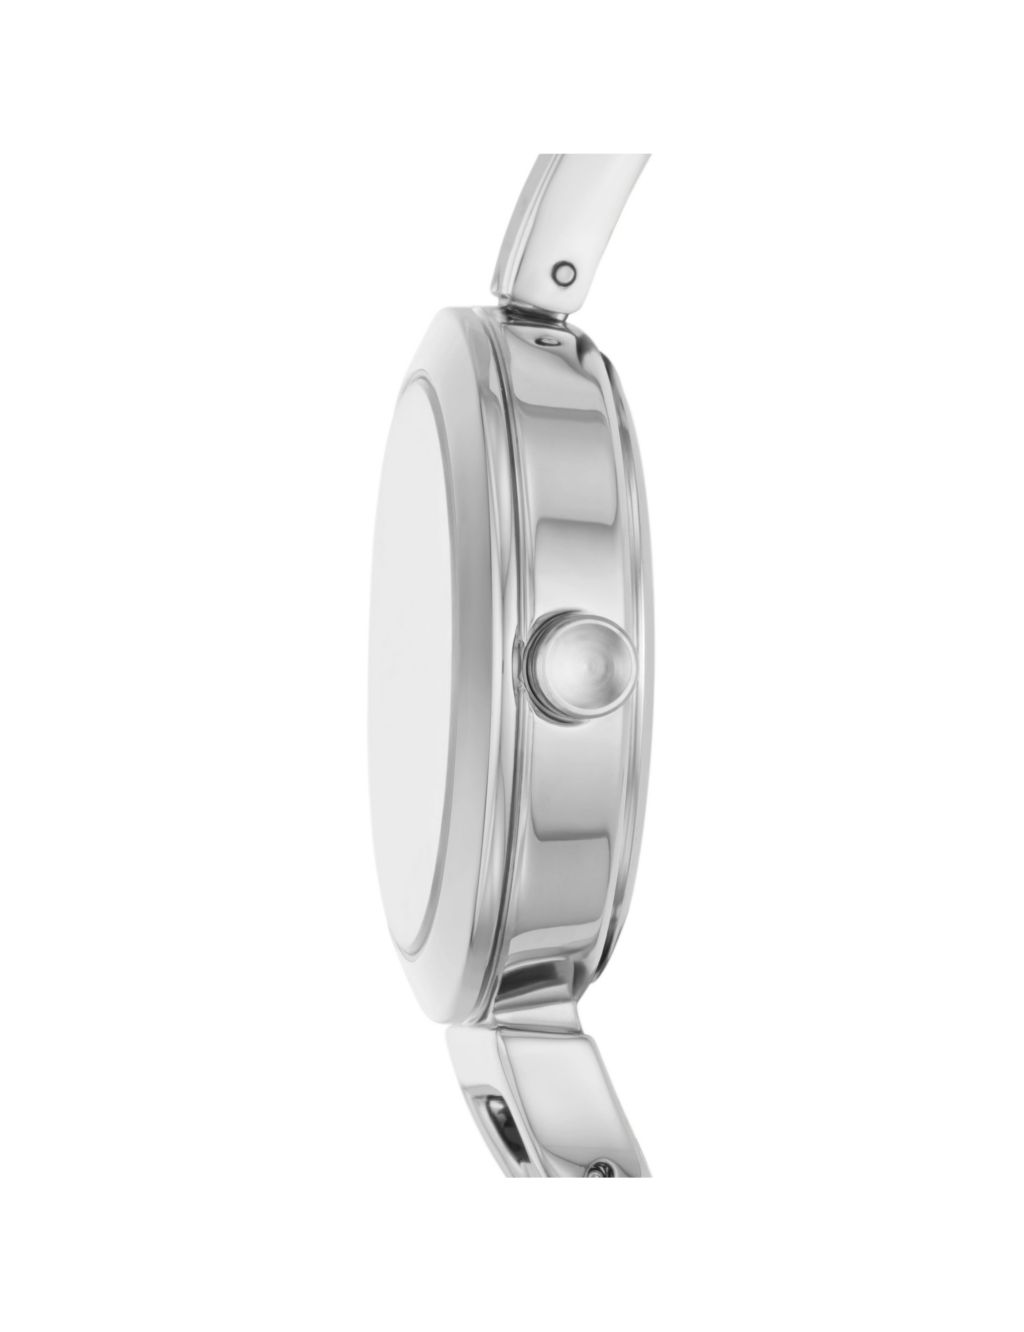 DKNY Uptown Stainless Steel Watch image 2